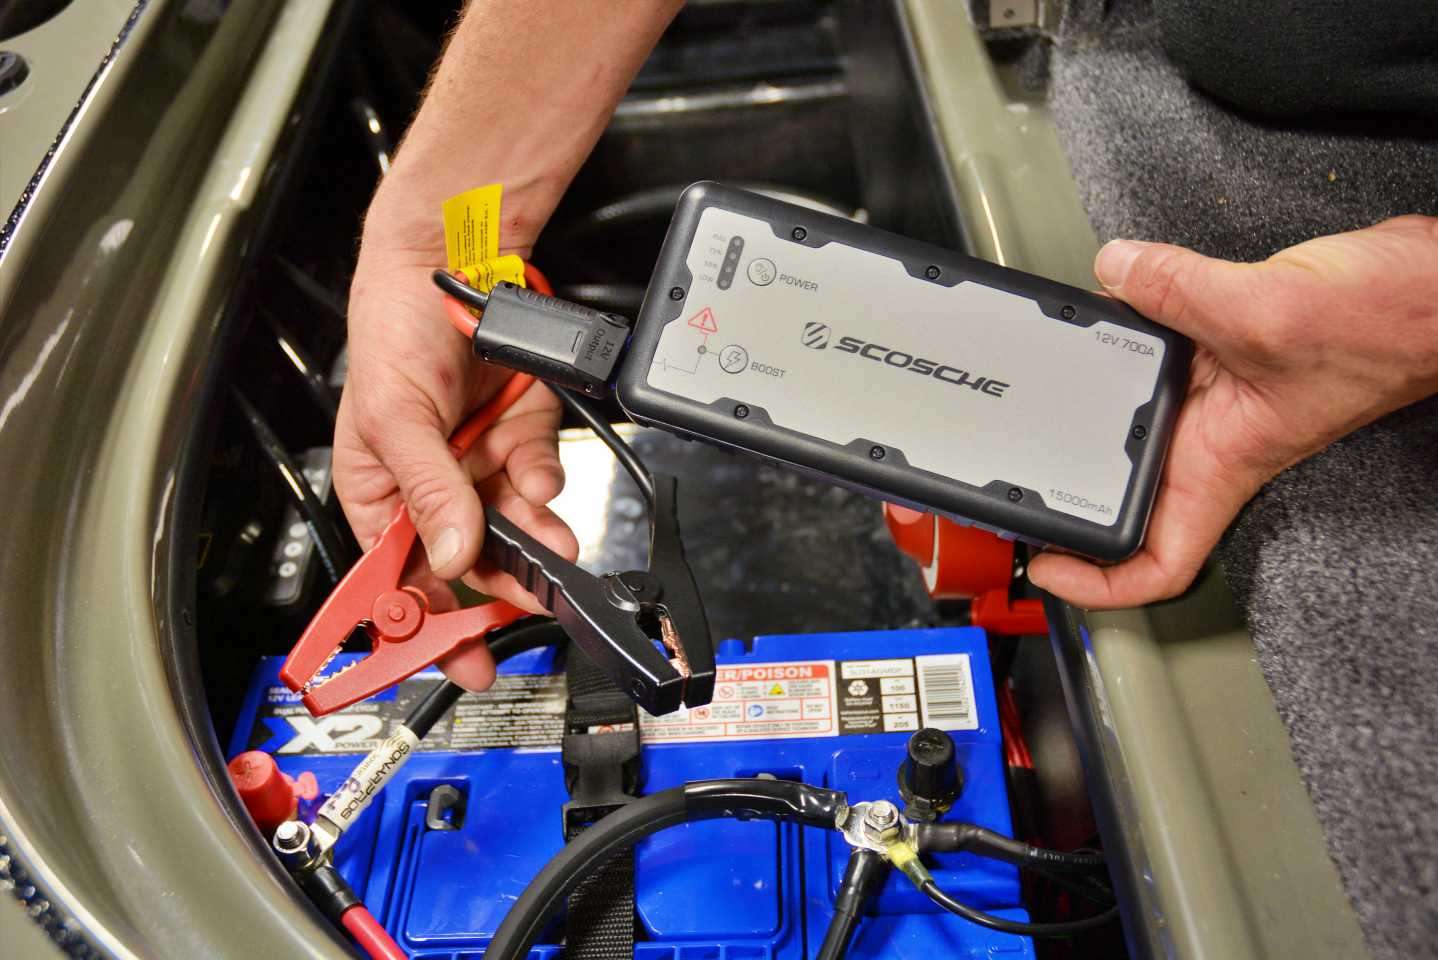 The PowerUp 700 portable jump starter can start boats and vehicles, and it includes safety protection against short circuit, reverse connection, polarity and more. It also has USB charging ports and an LED flashlight. âThis is essential gear and everyone should have it,â said Jocumsen. 
